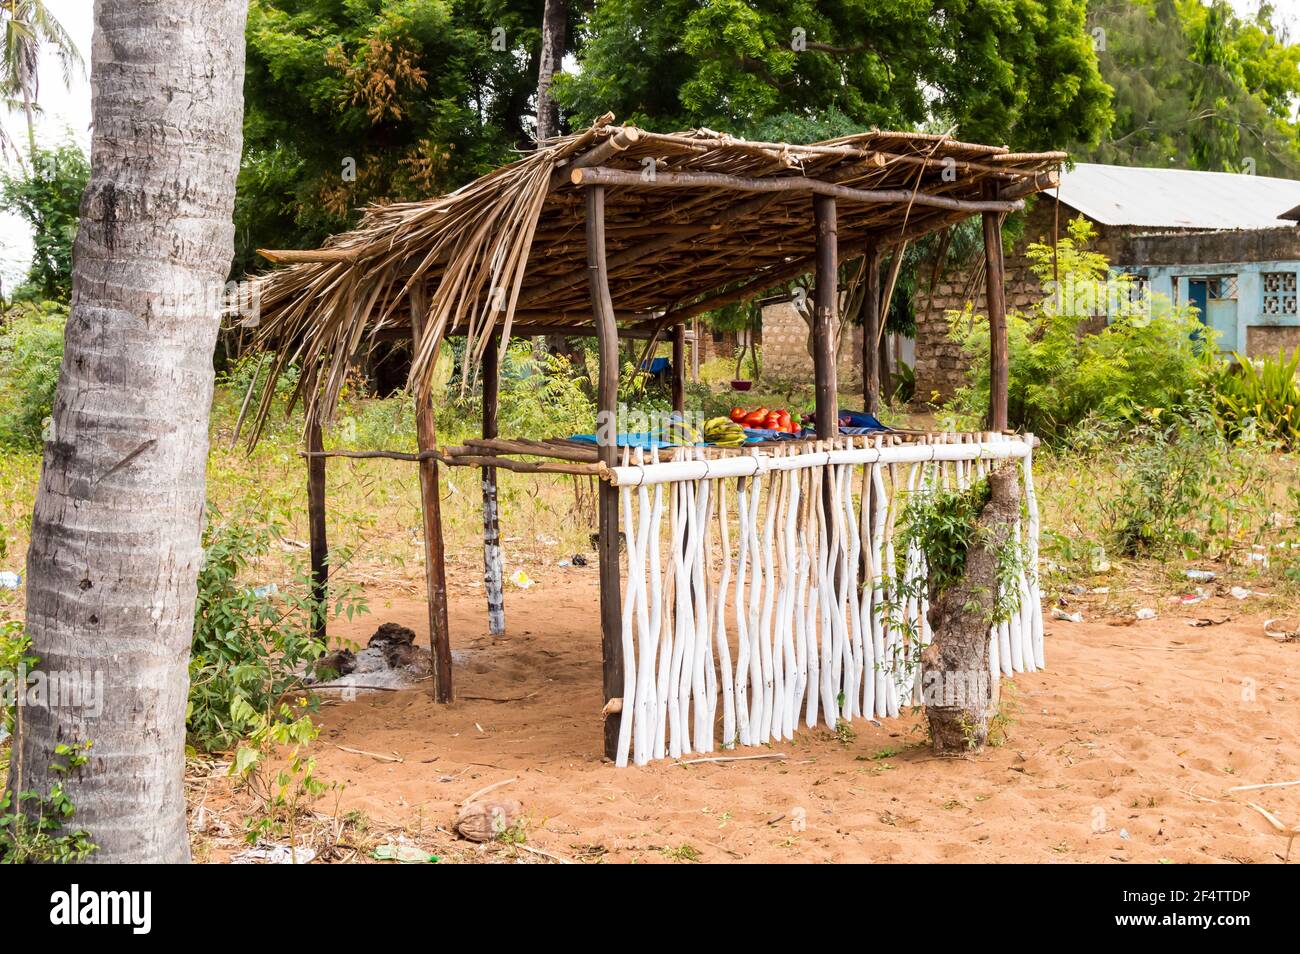 Small wooden stall with some tomatoes and bananas in the forest near Watamu in Kenya Stock Photo